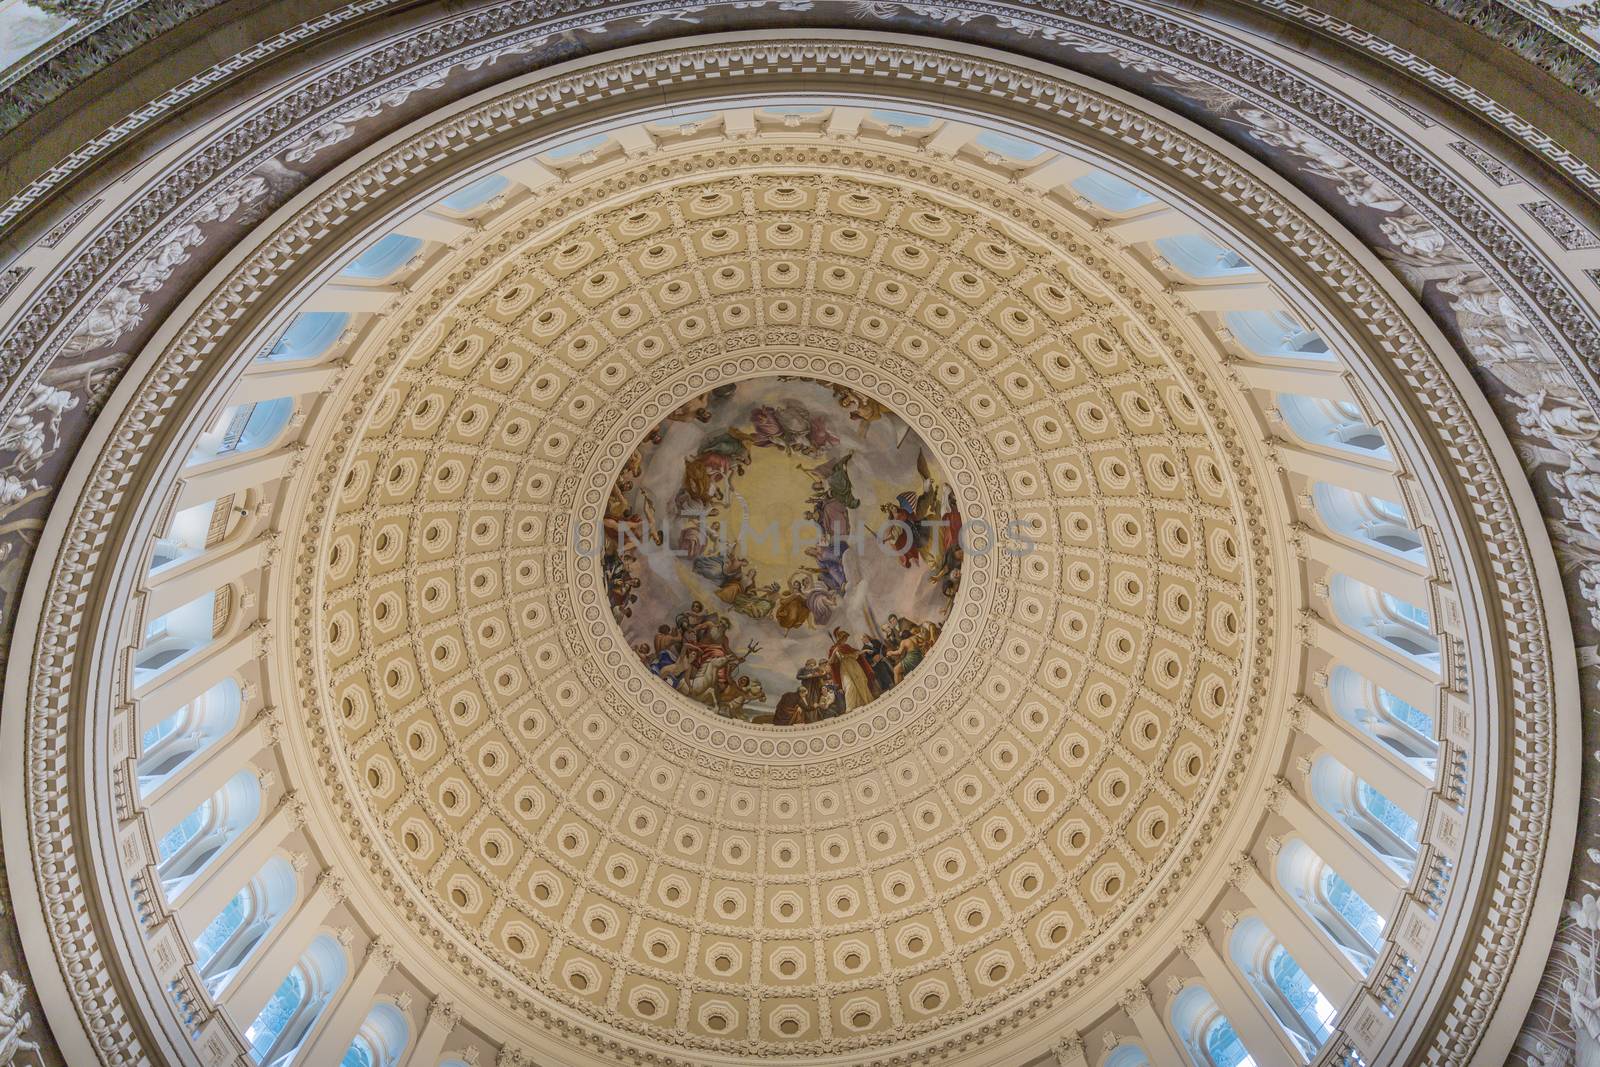 Looking up inside the Dome of the Capitol Building in Washington by chrisukphoto